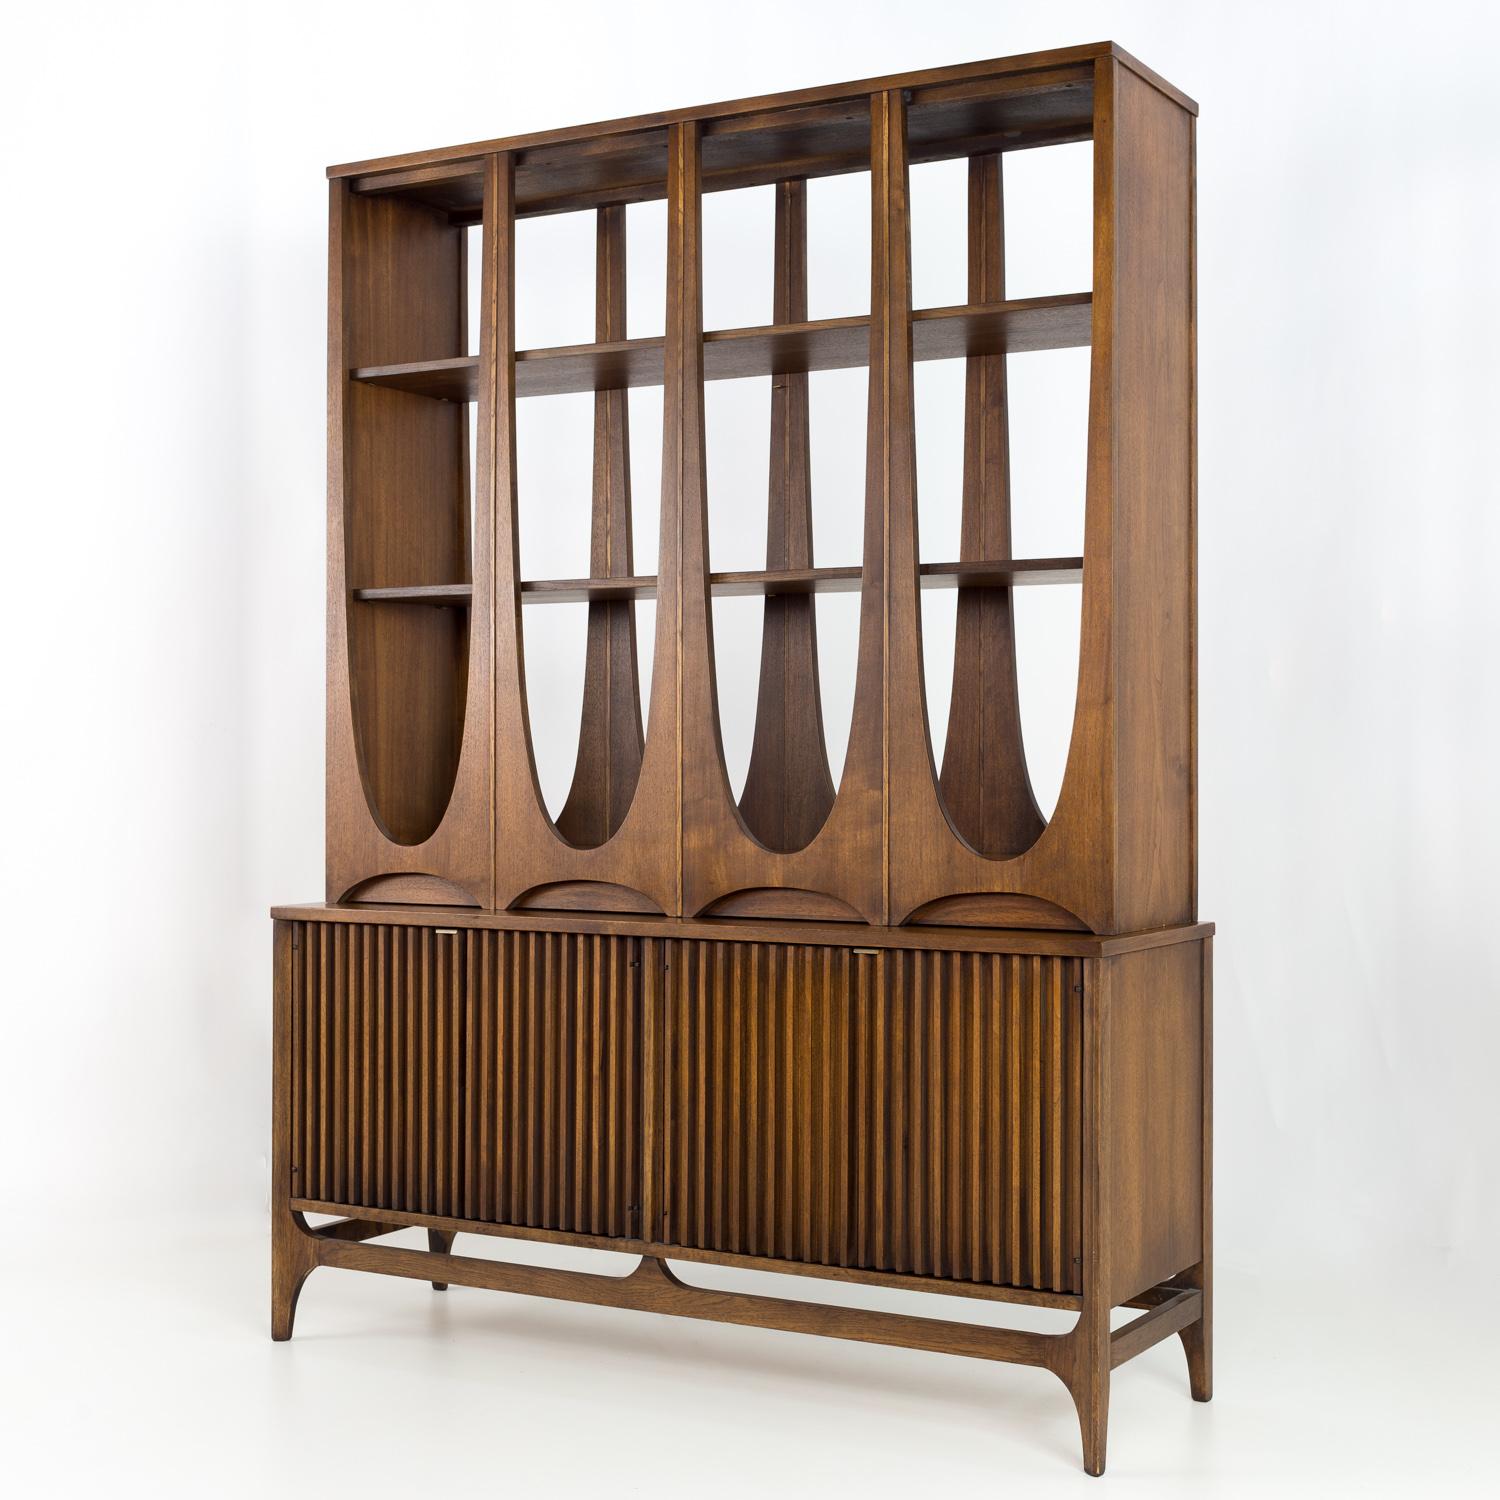 Broyhill Brasilia mid century room divider wall unit shelving

Base is 54 wide x 17 deep x 26.5 inches high and top is 52 wide x 13.5 deep x 46 inches high
Overall measurements are 54 wide x 17 deep x 72.5 inches high

All pieces of furniture